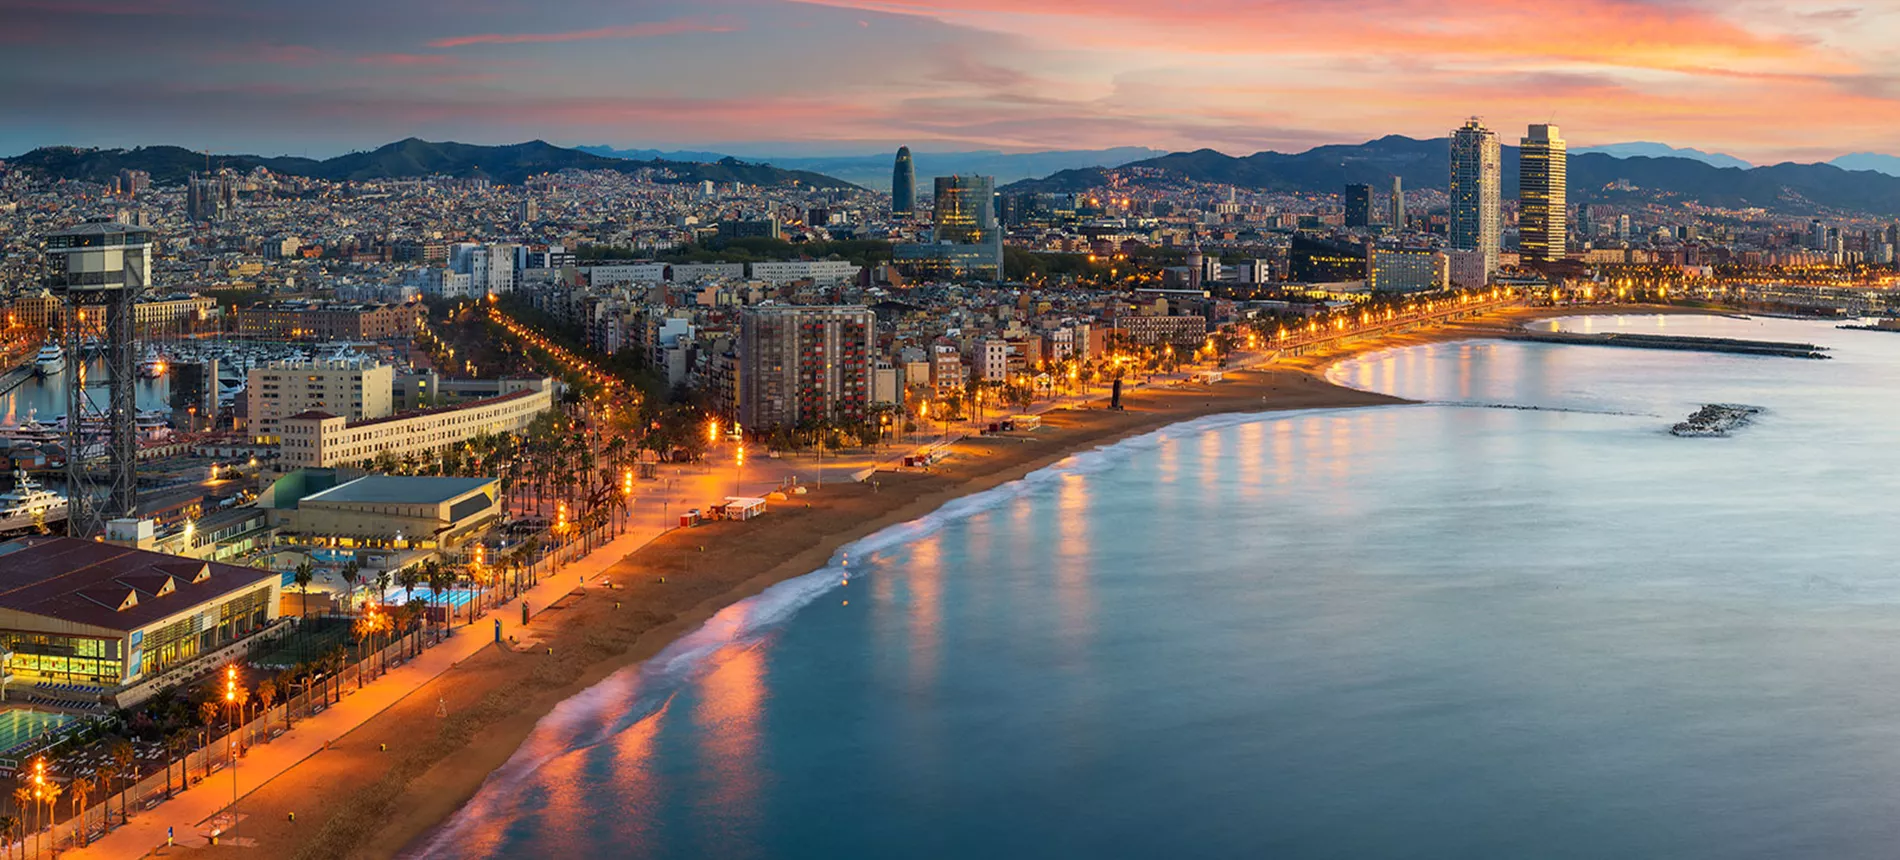 Barcelona by